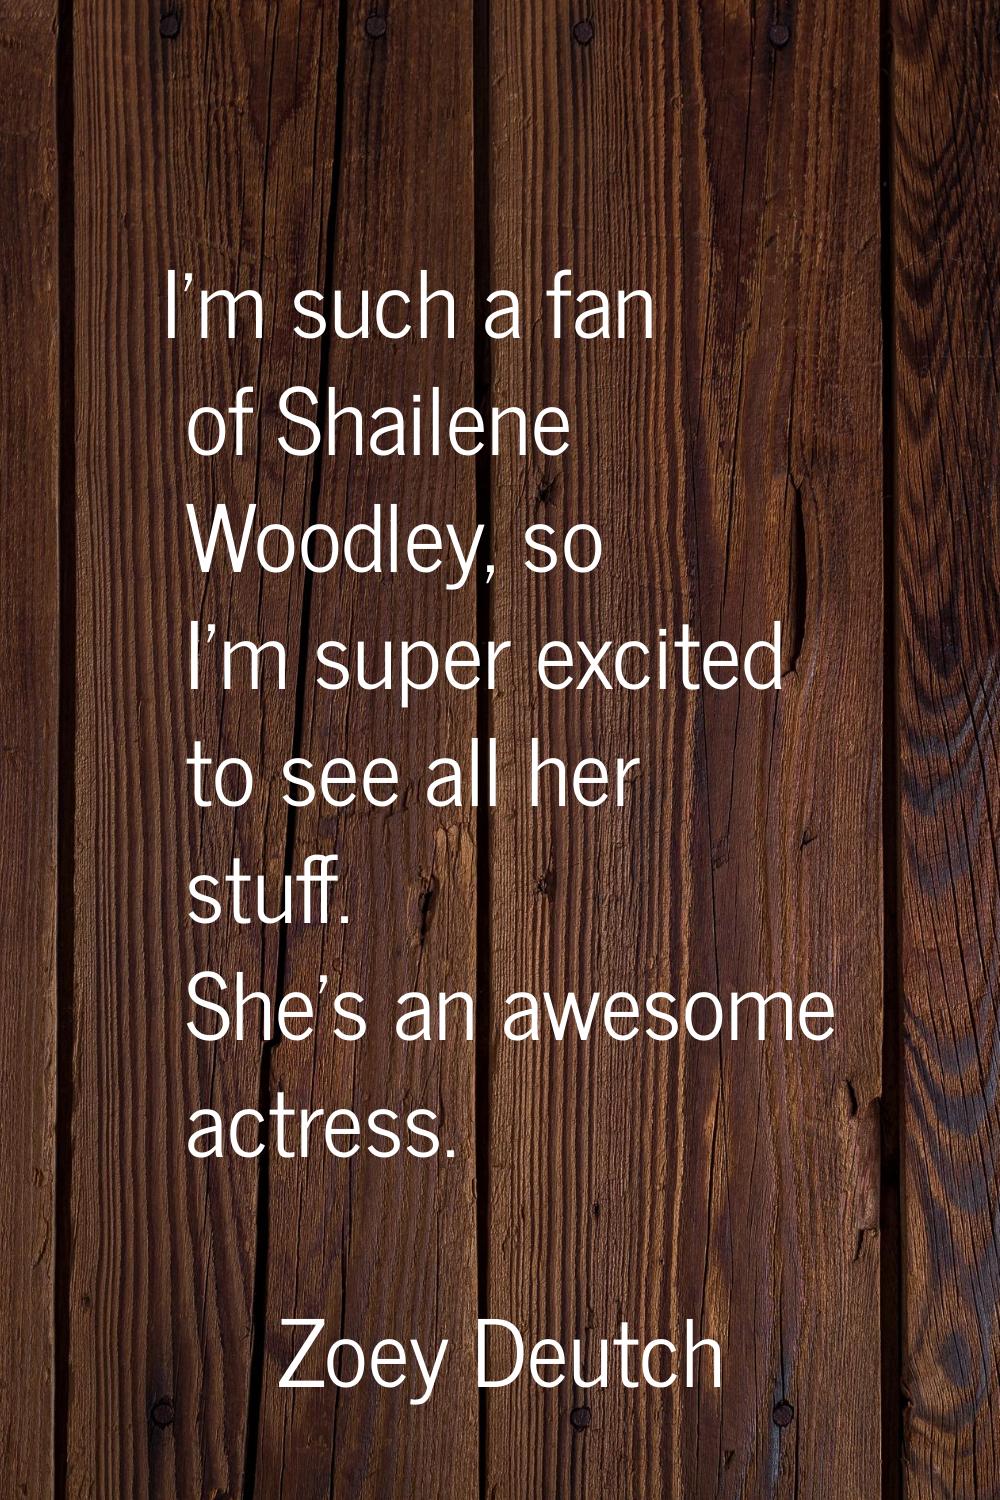 I'm such a fan of Shailene Woodley, so I'm super excited to see all her stuff. She's an awesome act